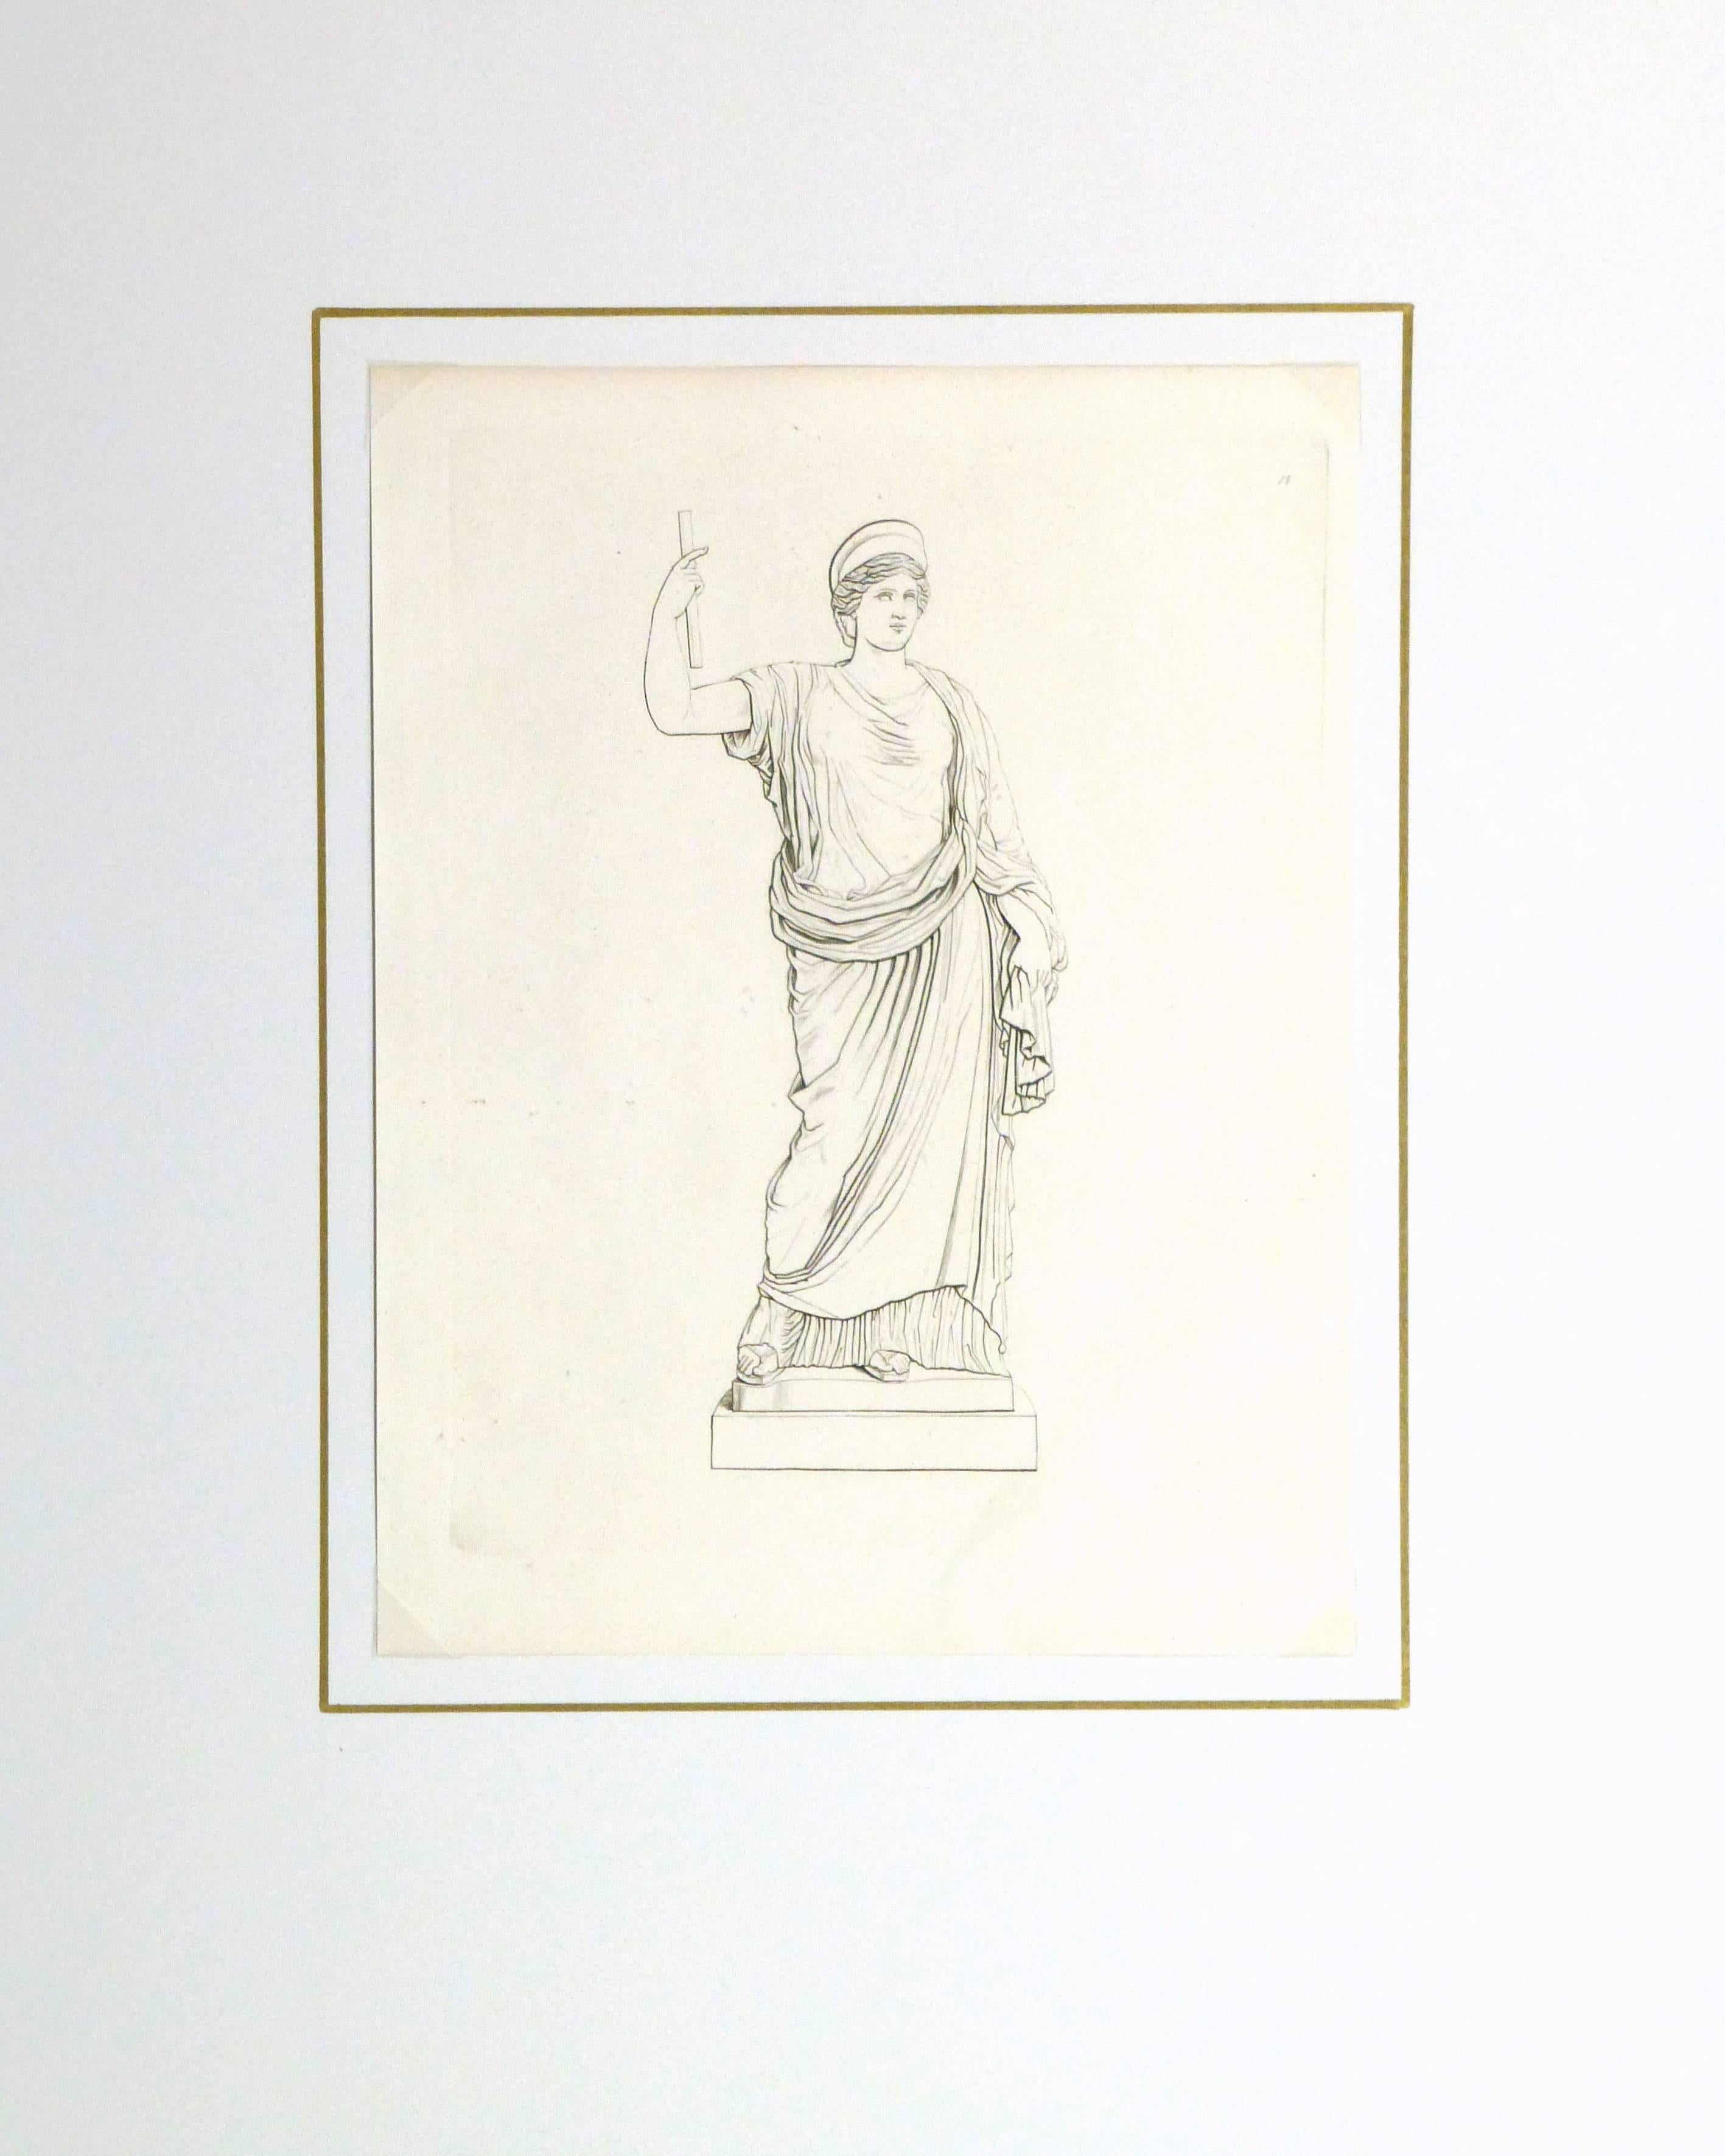 Antique copper engraving of a roman female statue, circa 1850.

Original artwork on paper displayed on a white mat with a gold border. Archival plastic sleeve and Certificate of Authenticity included. Artwork, 11.5